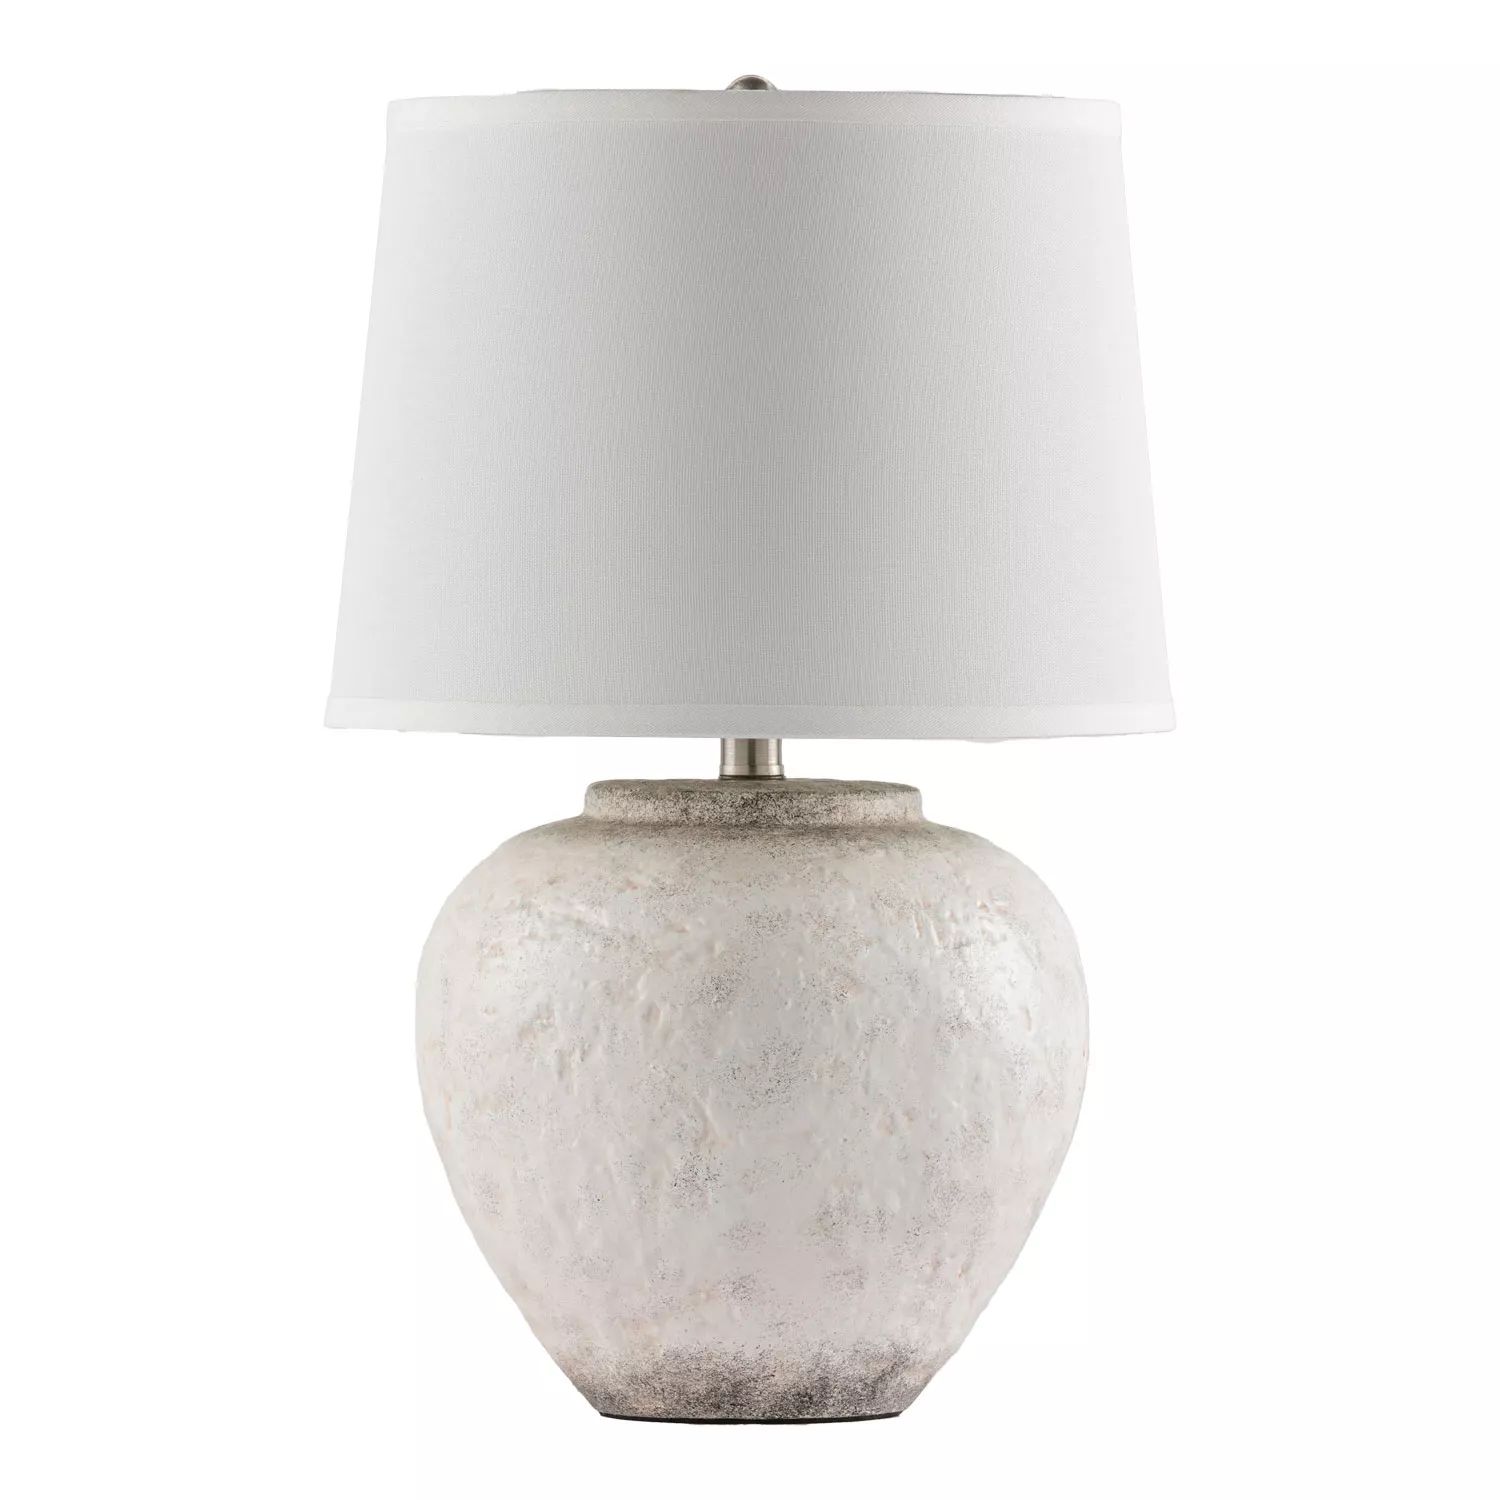 details by Becki Owens Madelyn Ceramic Table Lamp, Ash Gray Finish | Sam's Club